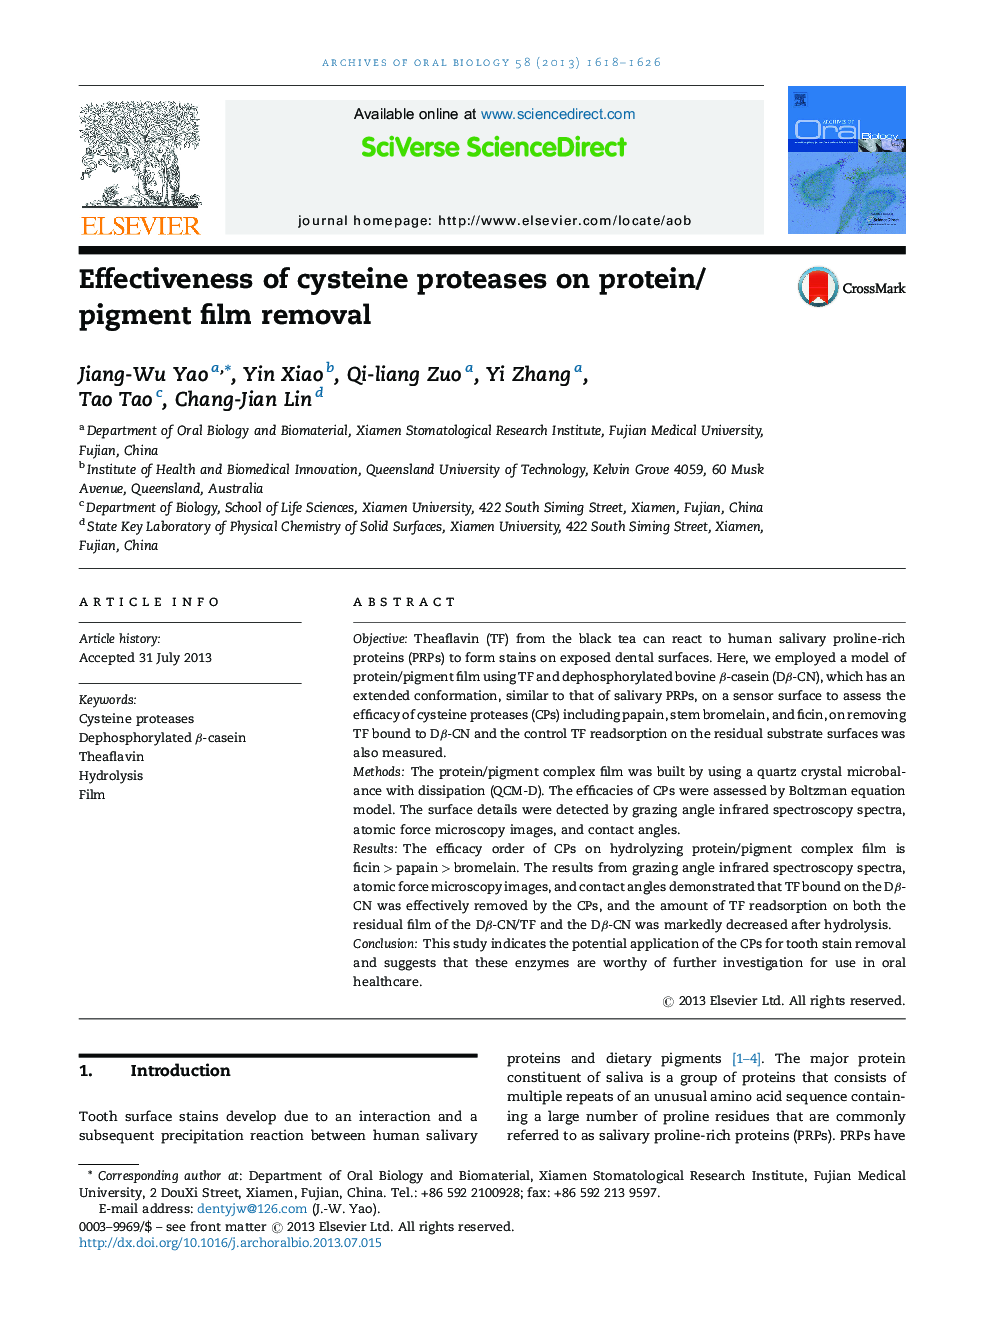 Effectiveness of cysteine proteases on protein/pigment film removal